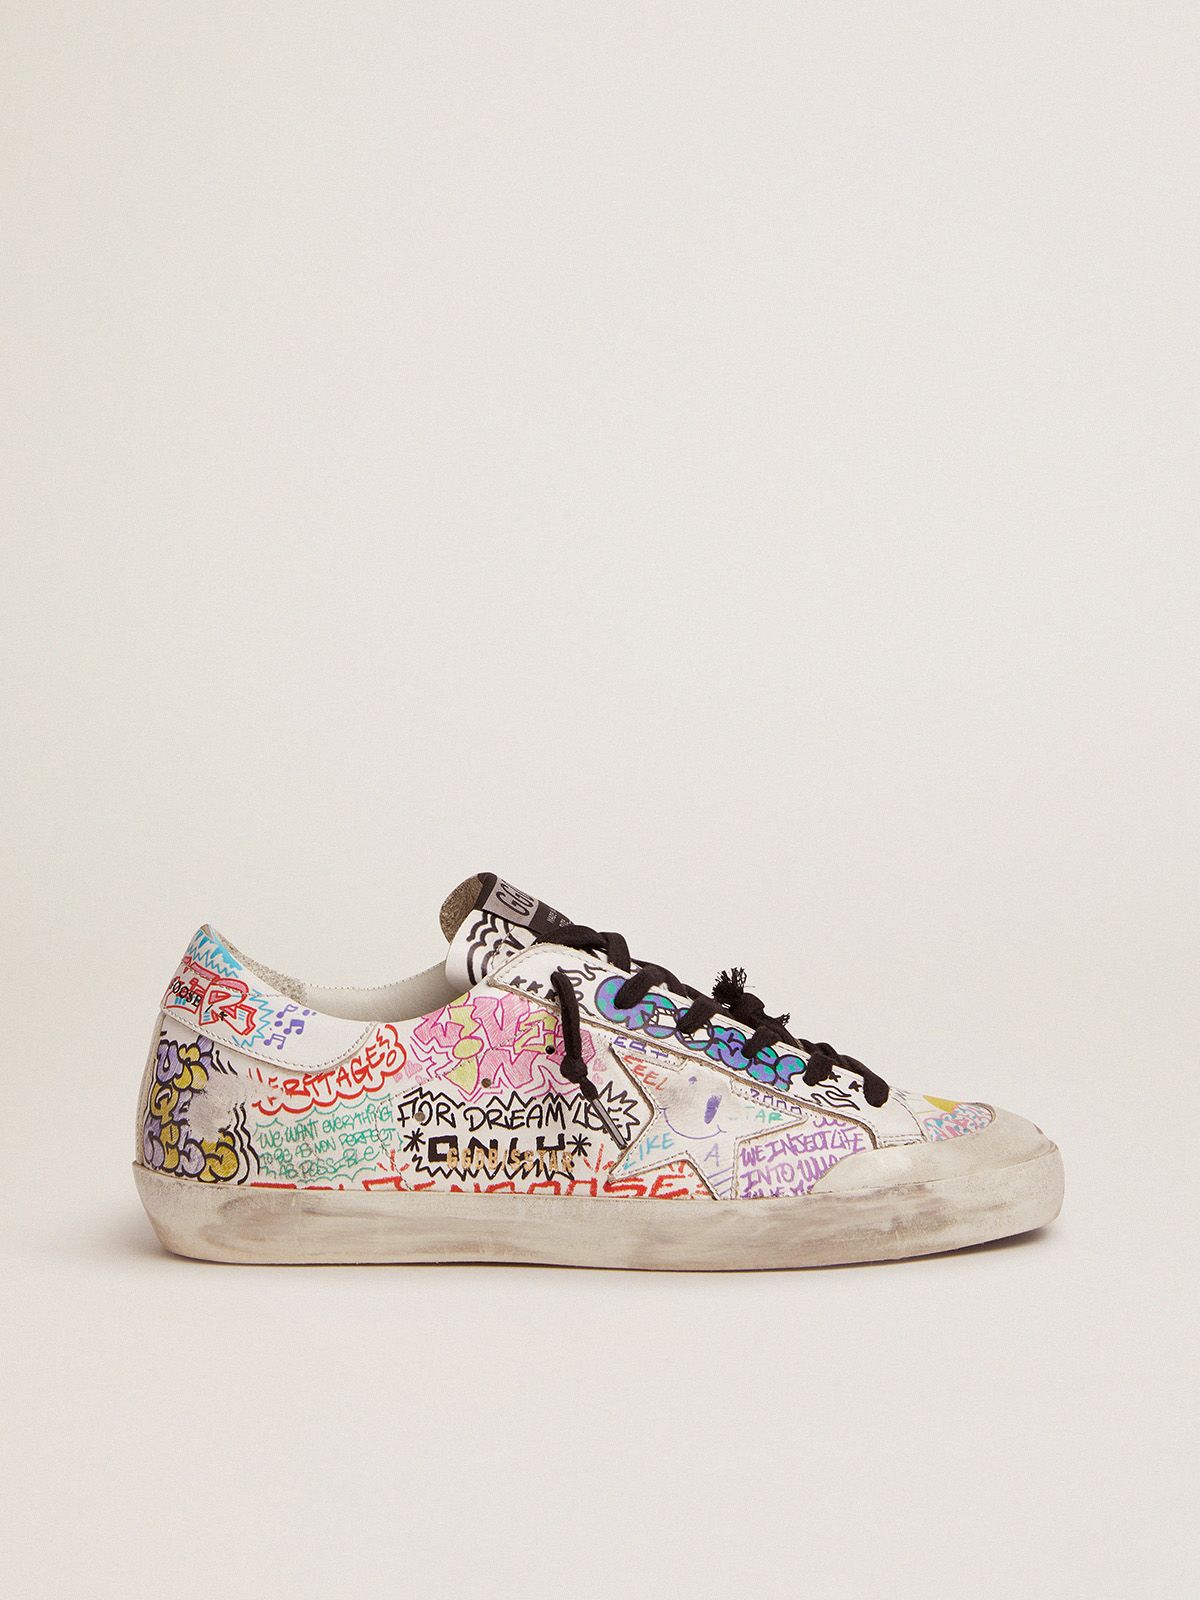 golden goose white multicolored with graffiti print Super-Star in leather sneakers